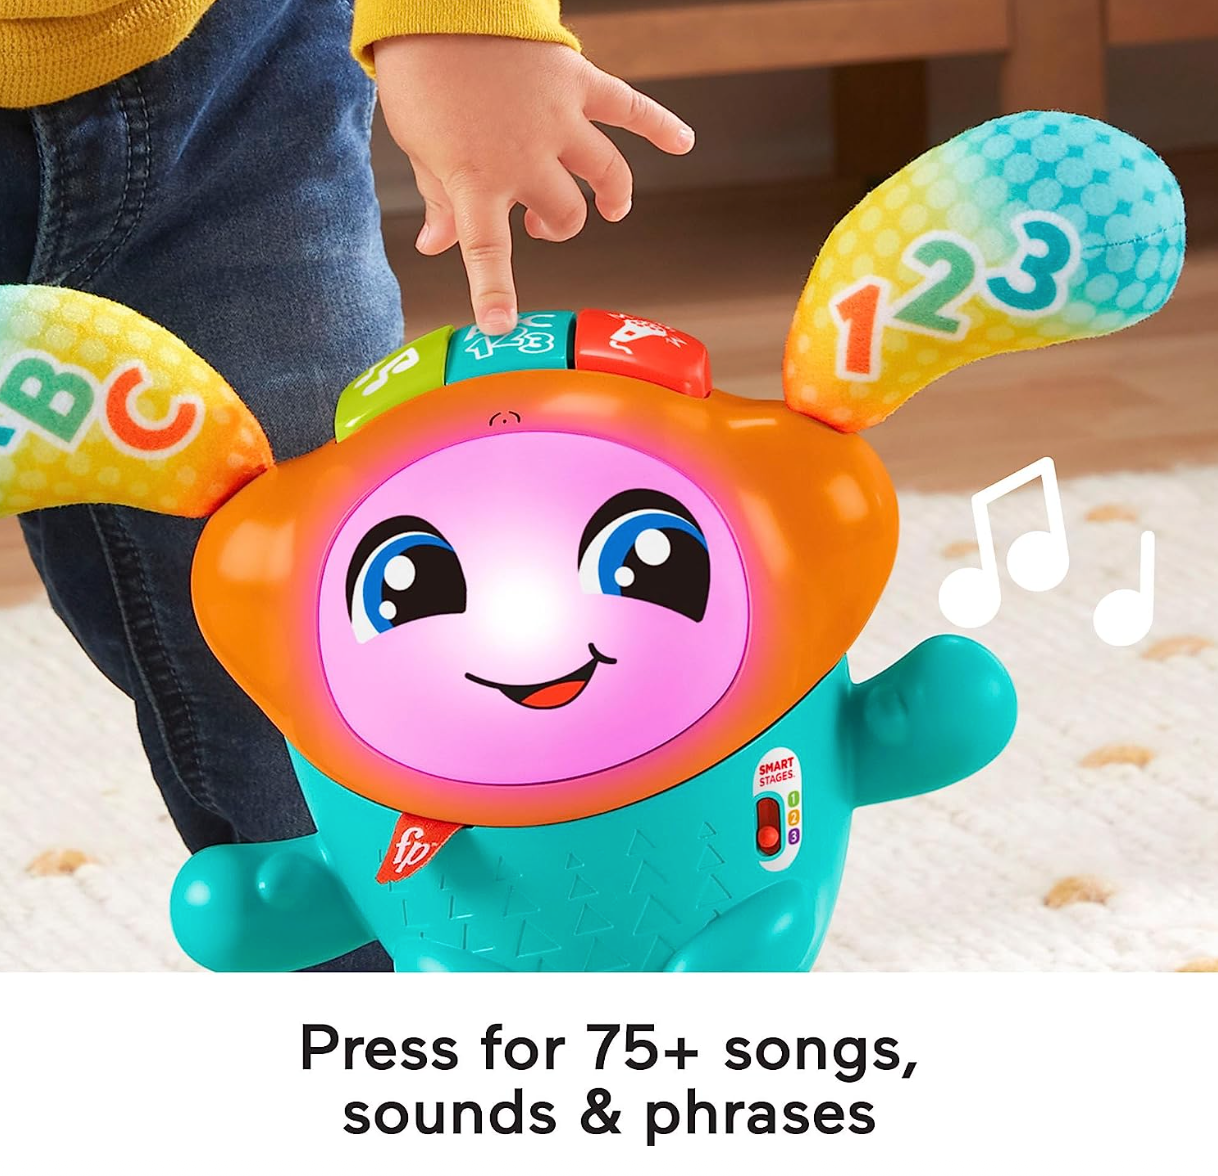 Fisher-Price Baby & Toddler Learning Toy Dj Bouncin’ Beats With Music Lights & Bouncing Action For Ages 6+ Months